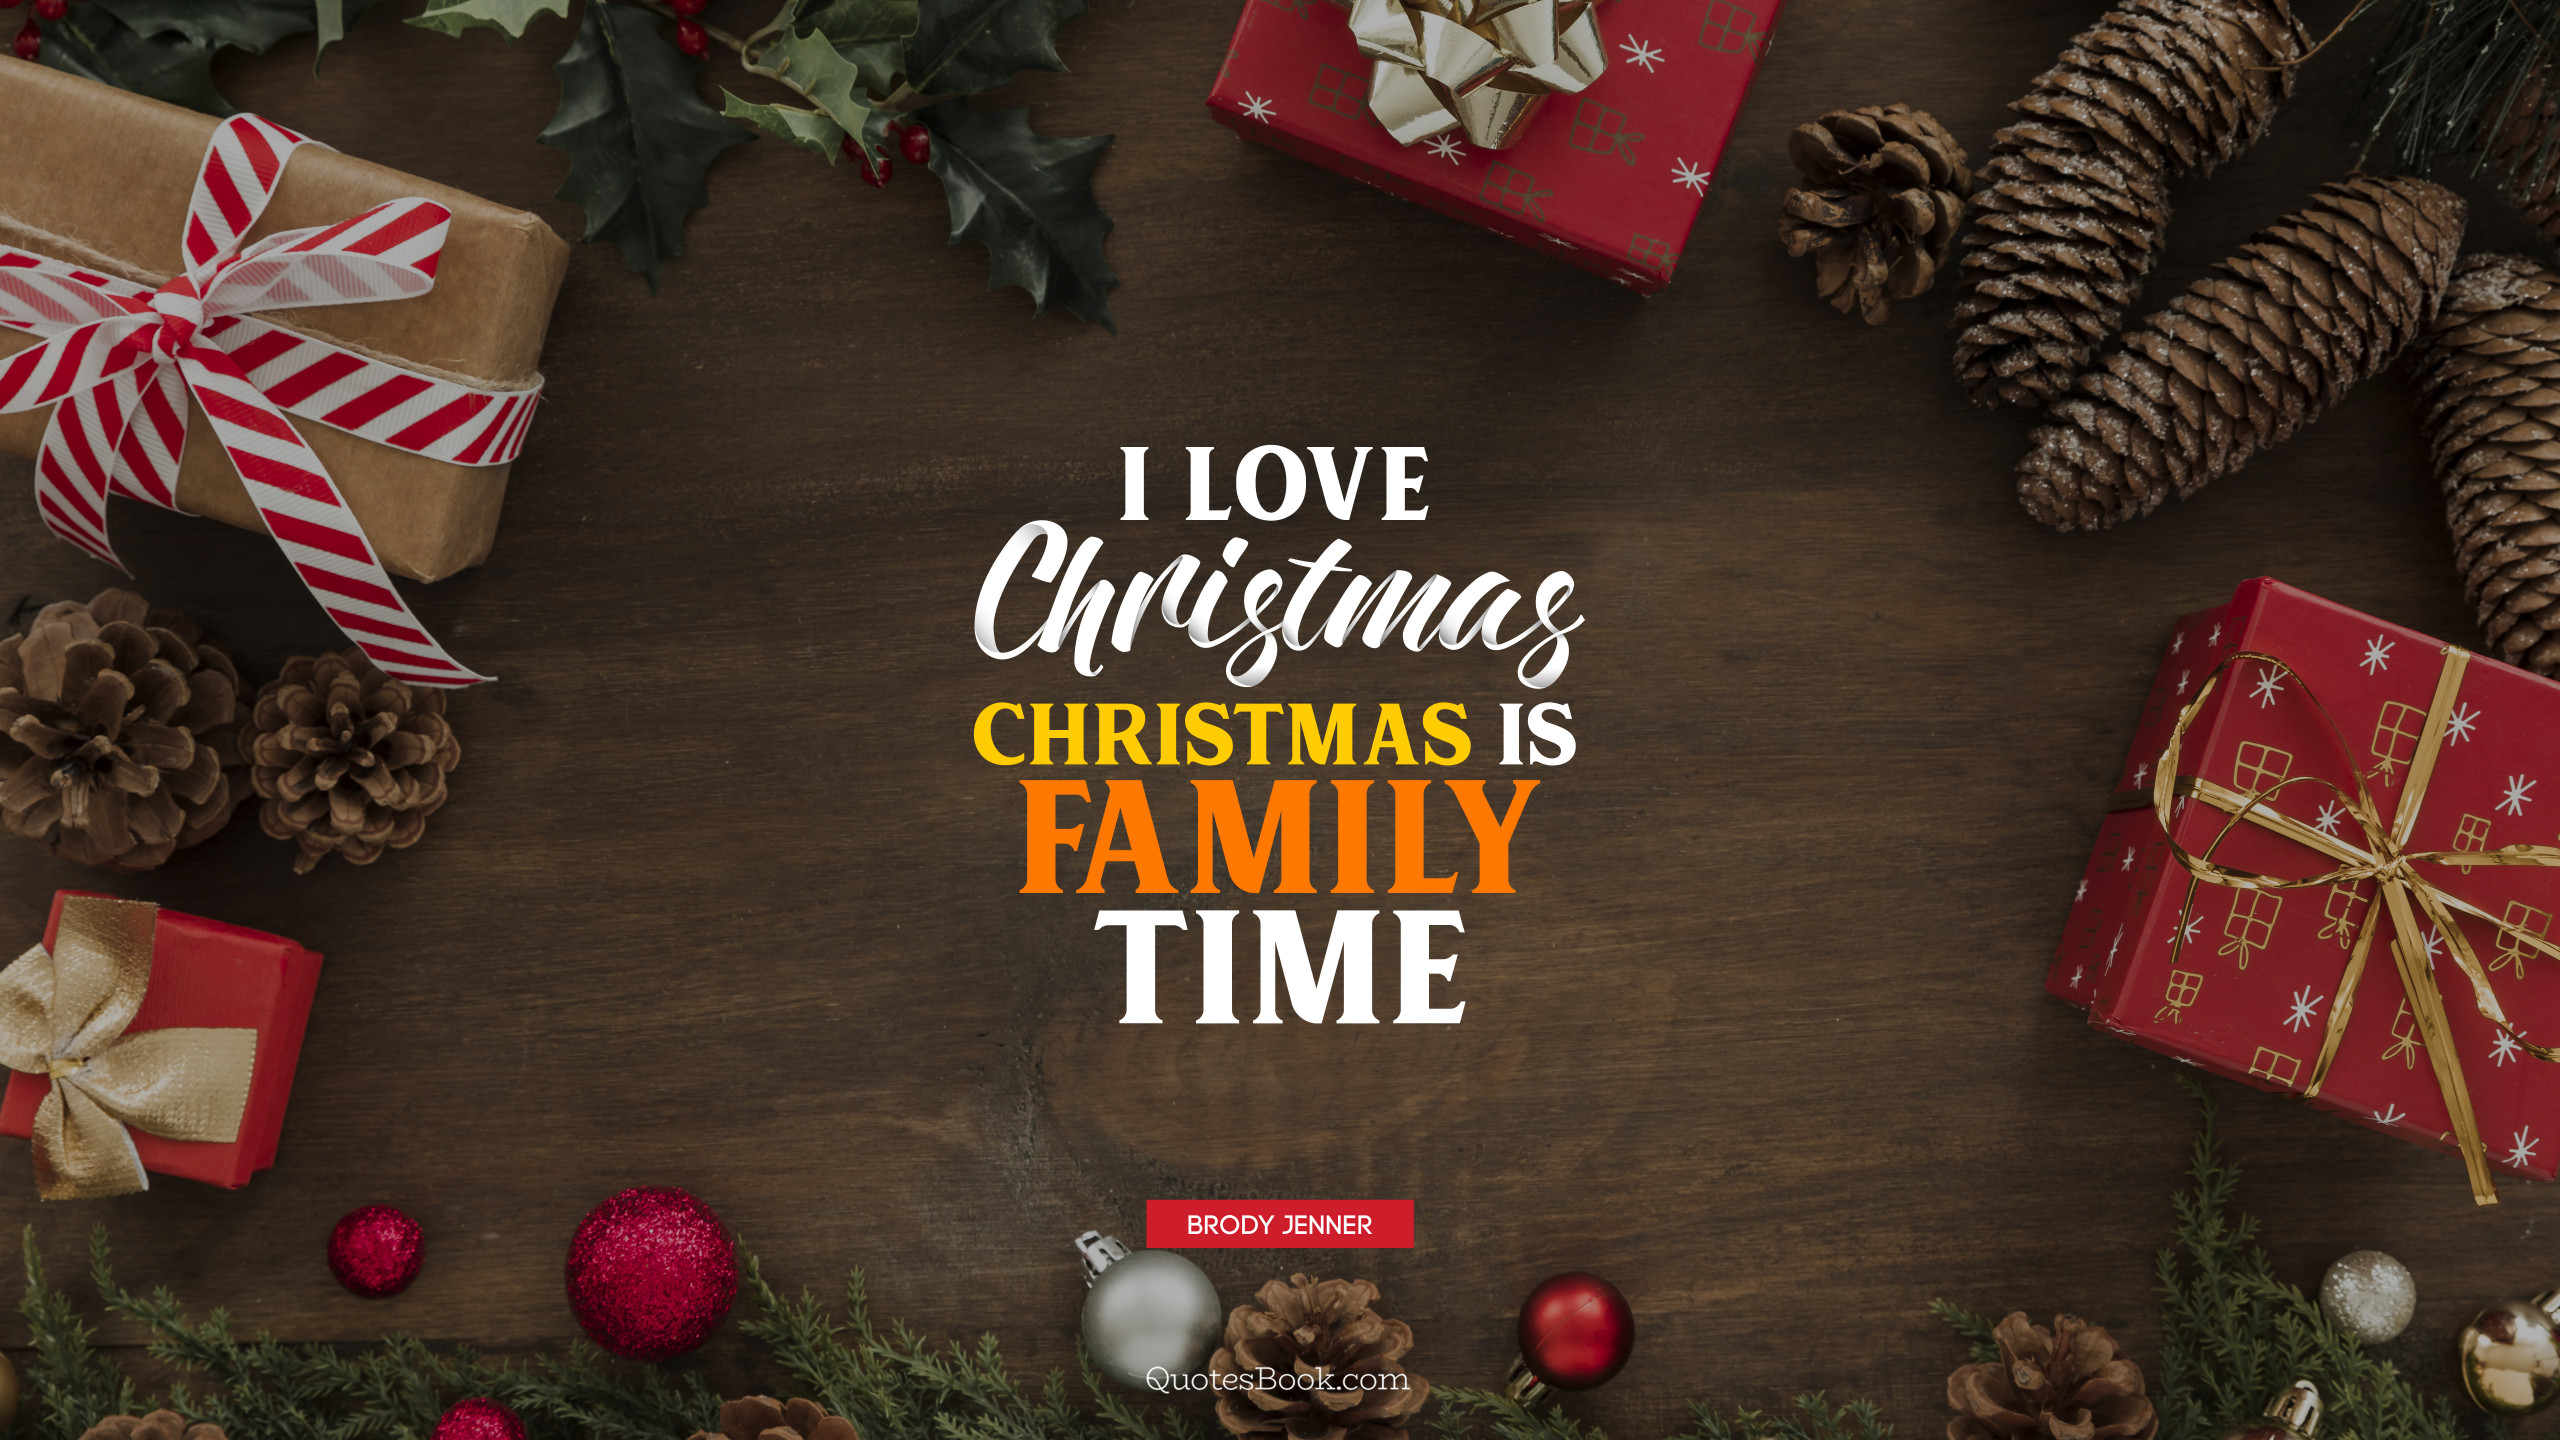 I love Christmas. Christmas is family time.  Quote by Brody Jenner